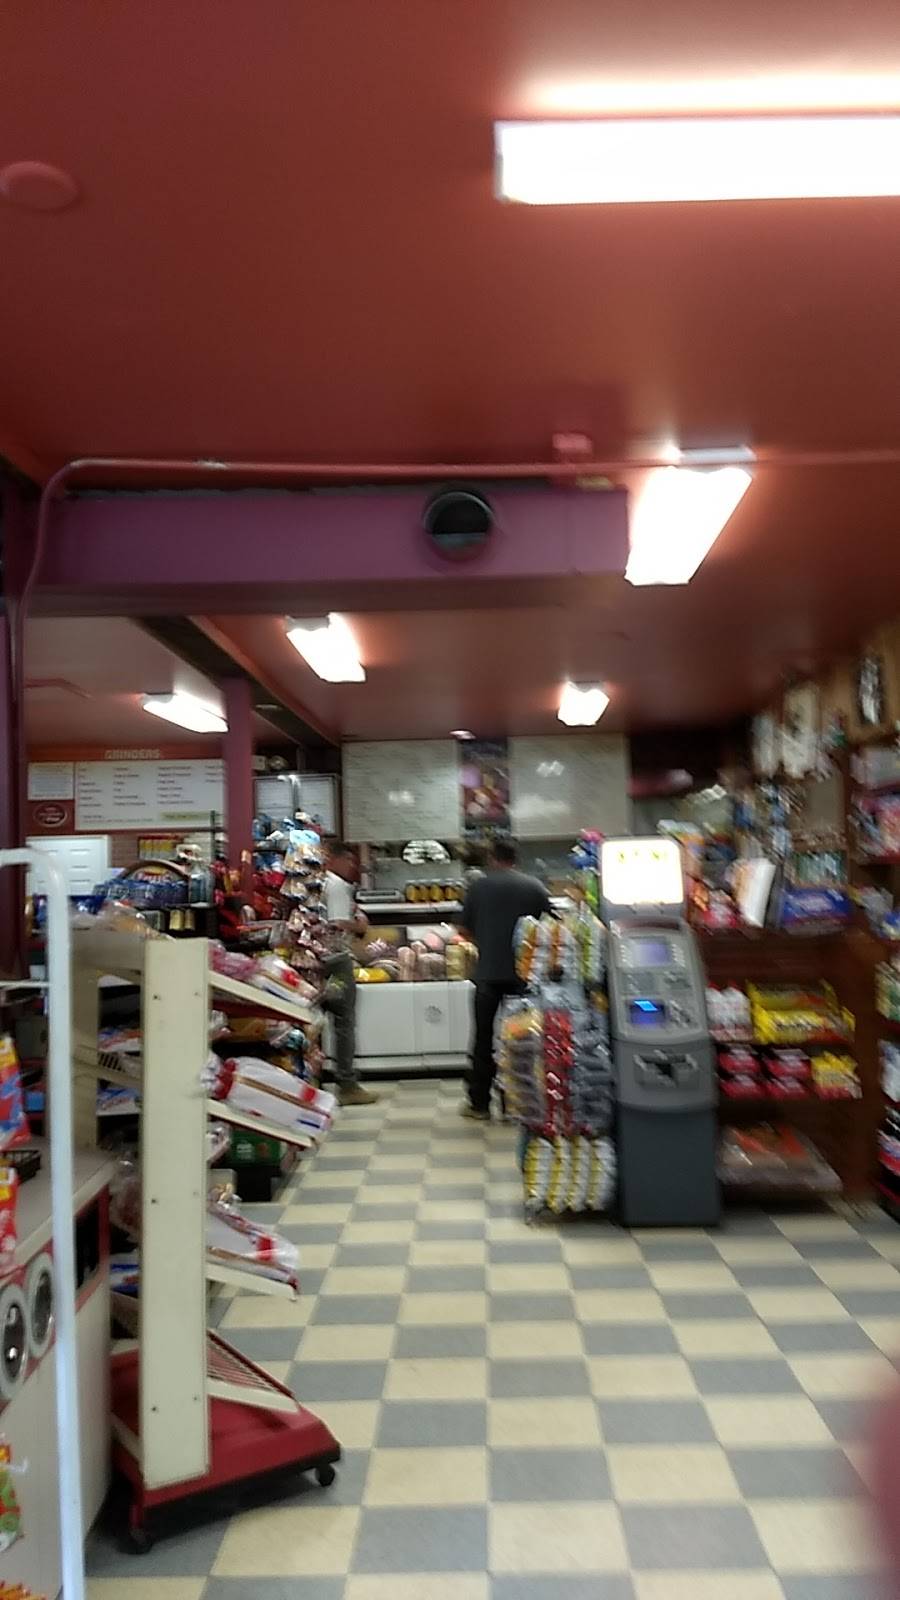 876b147bcfe902c15375409cbcc489d0  United States Connecticut Hartford County Canton 786688 Cherry Brook Pizza Groceryhtm 